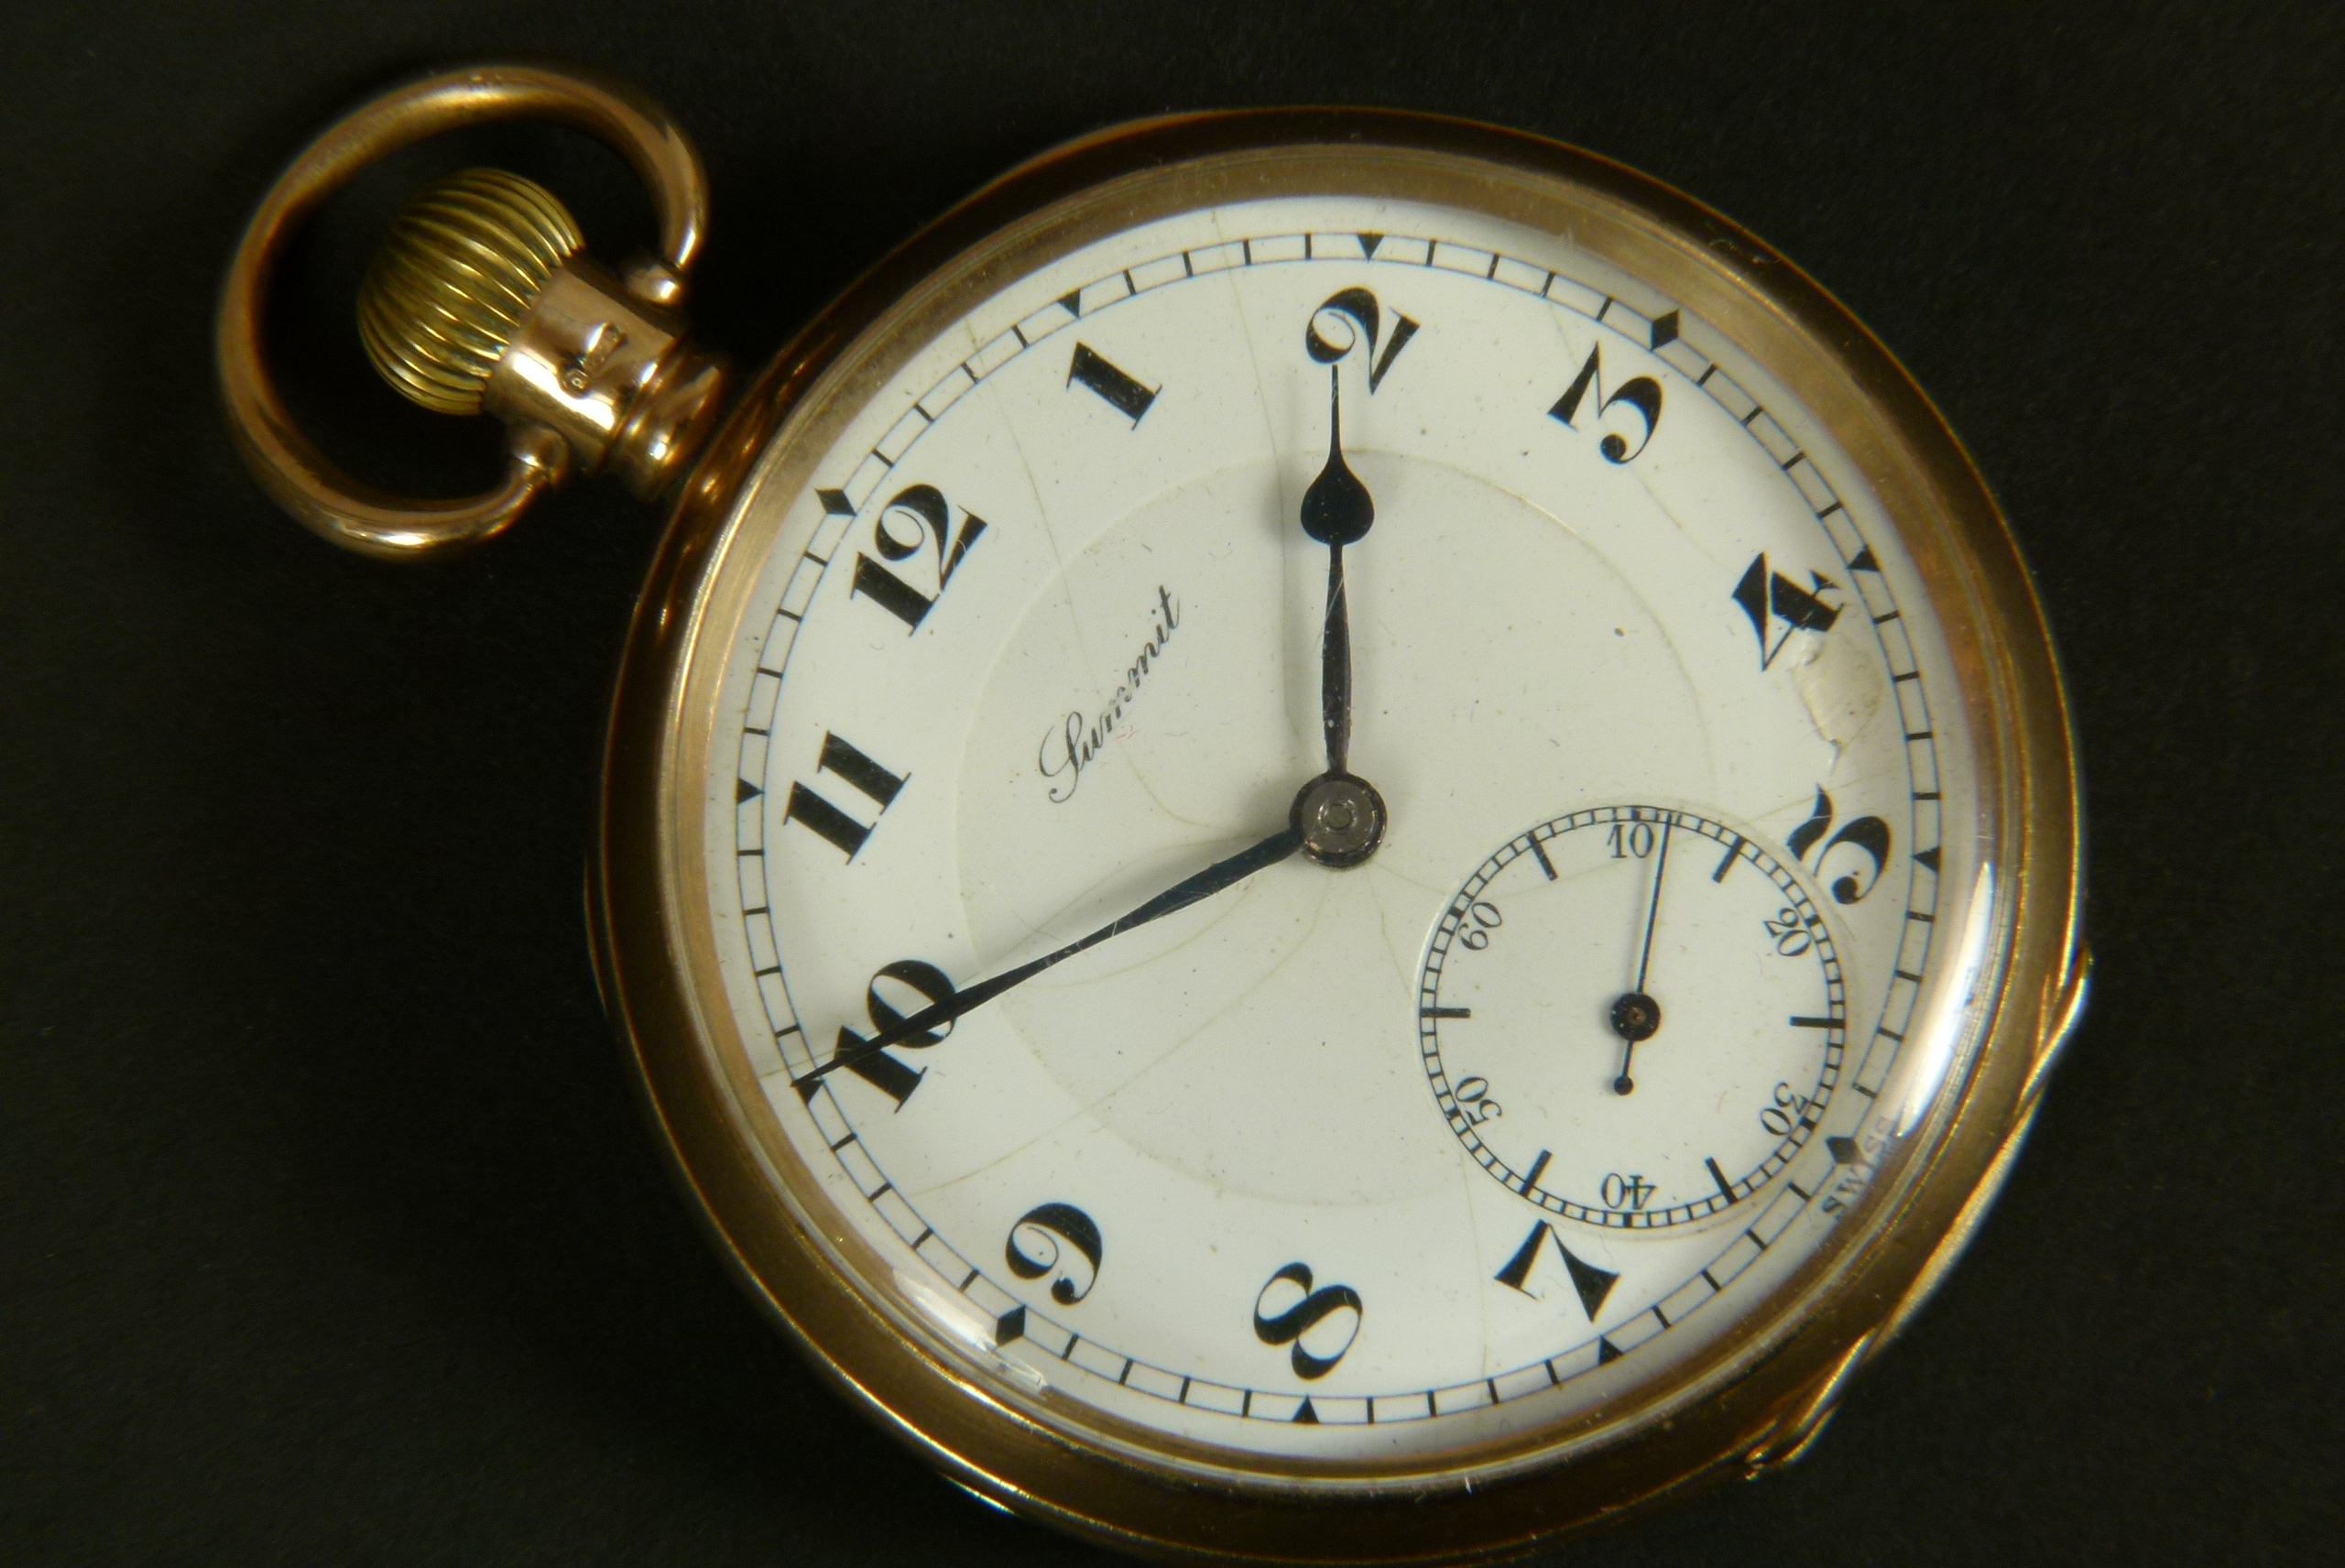 A George V open faced pocket watch by Summit in 9ct gold, case No 255 707, keyless 17 jewelled lever - Image 3 of 4